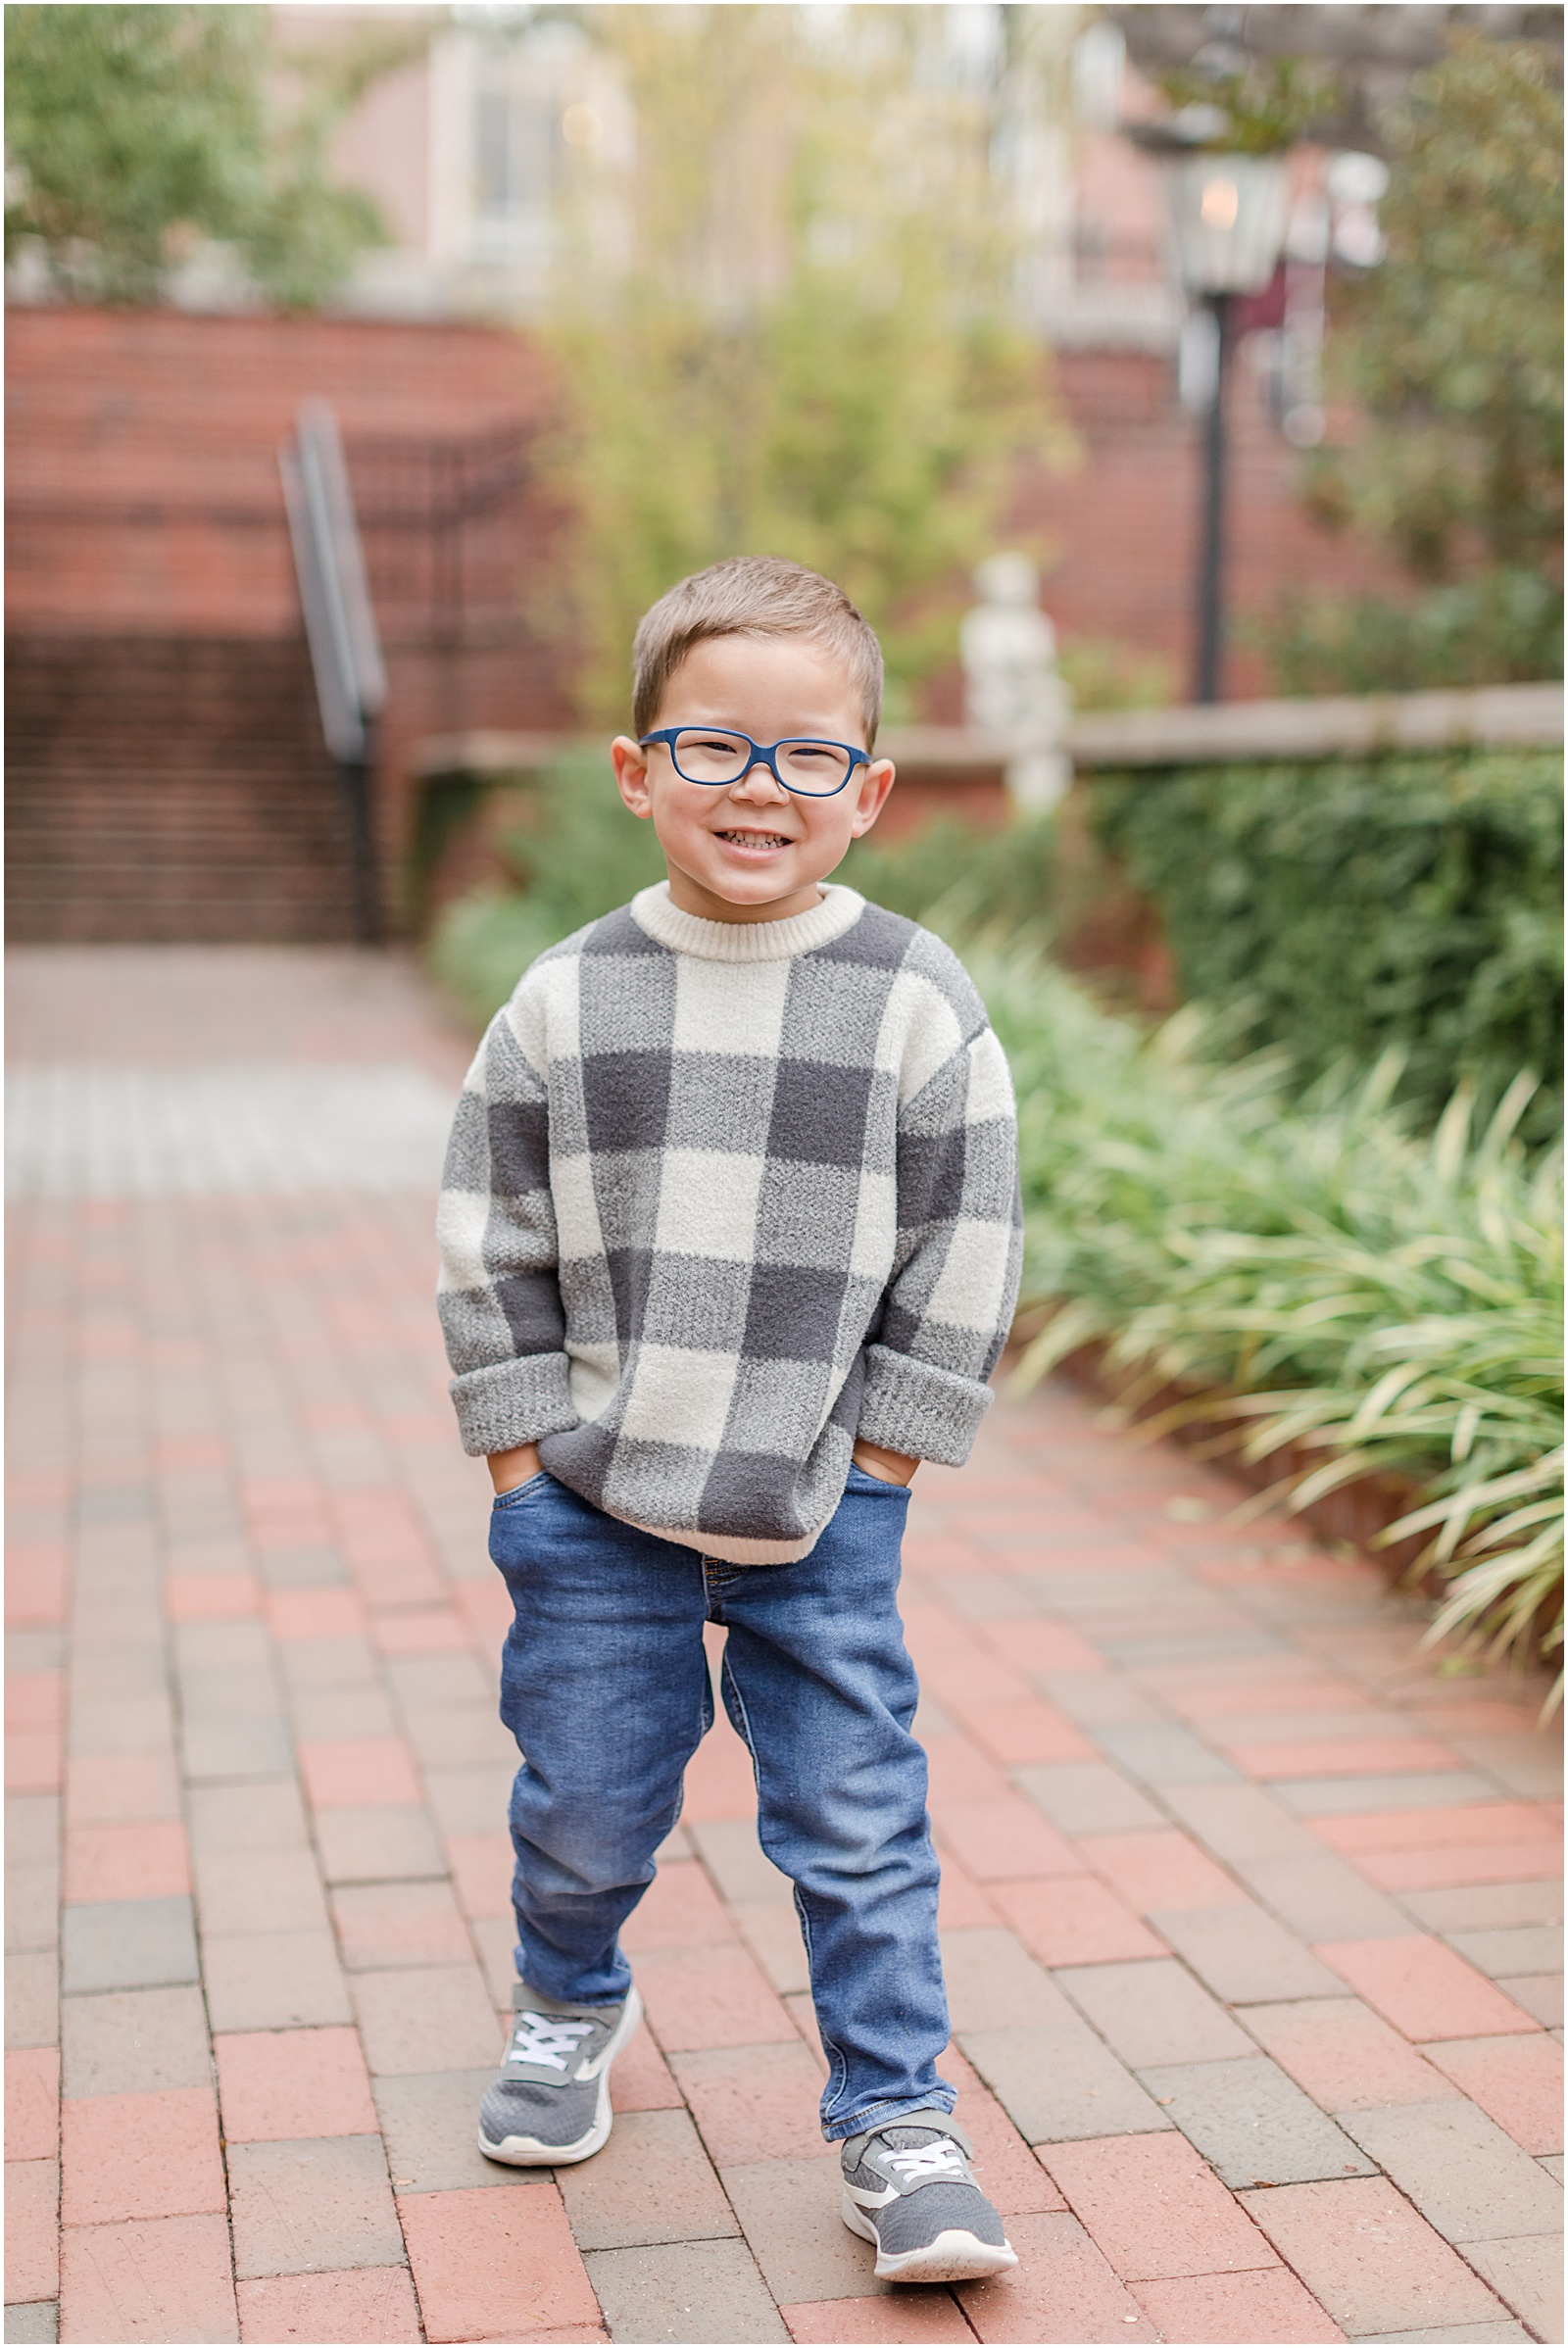 Young boy photographed on brick pathway in Alpharetta Georgia